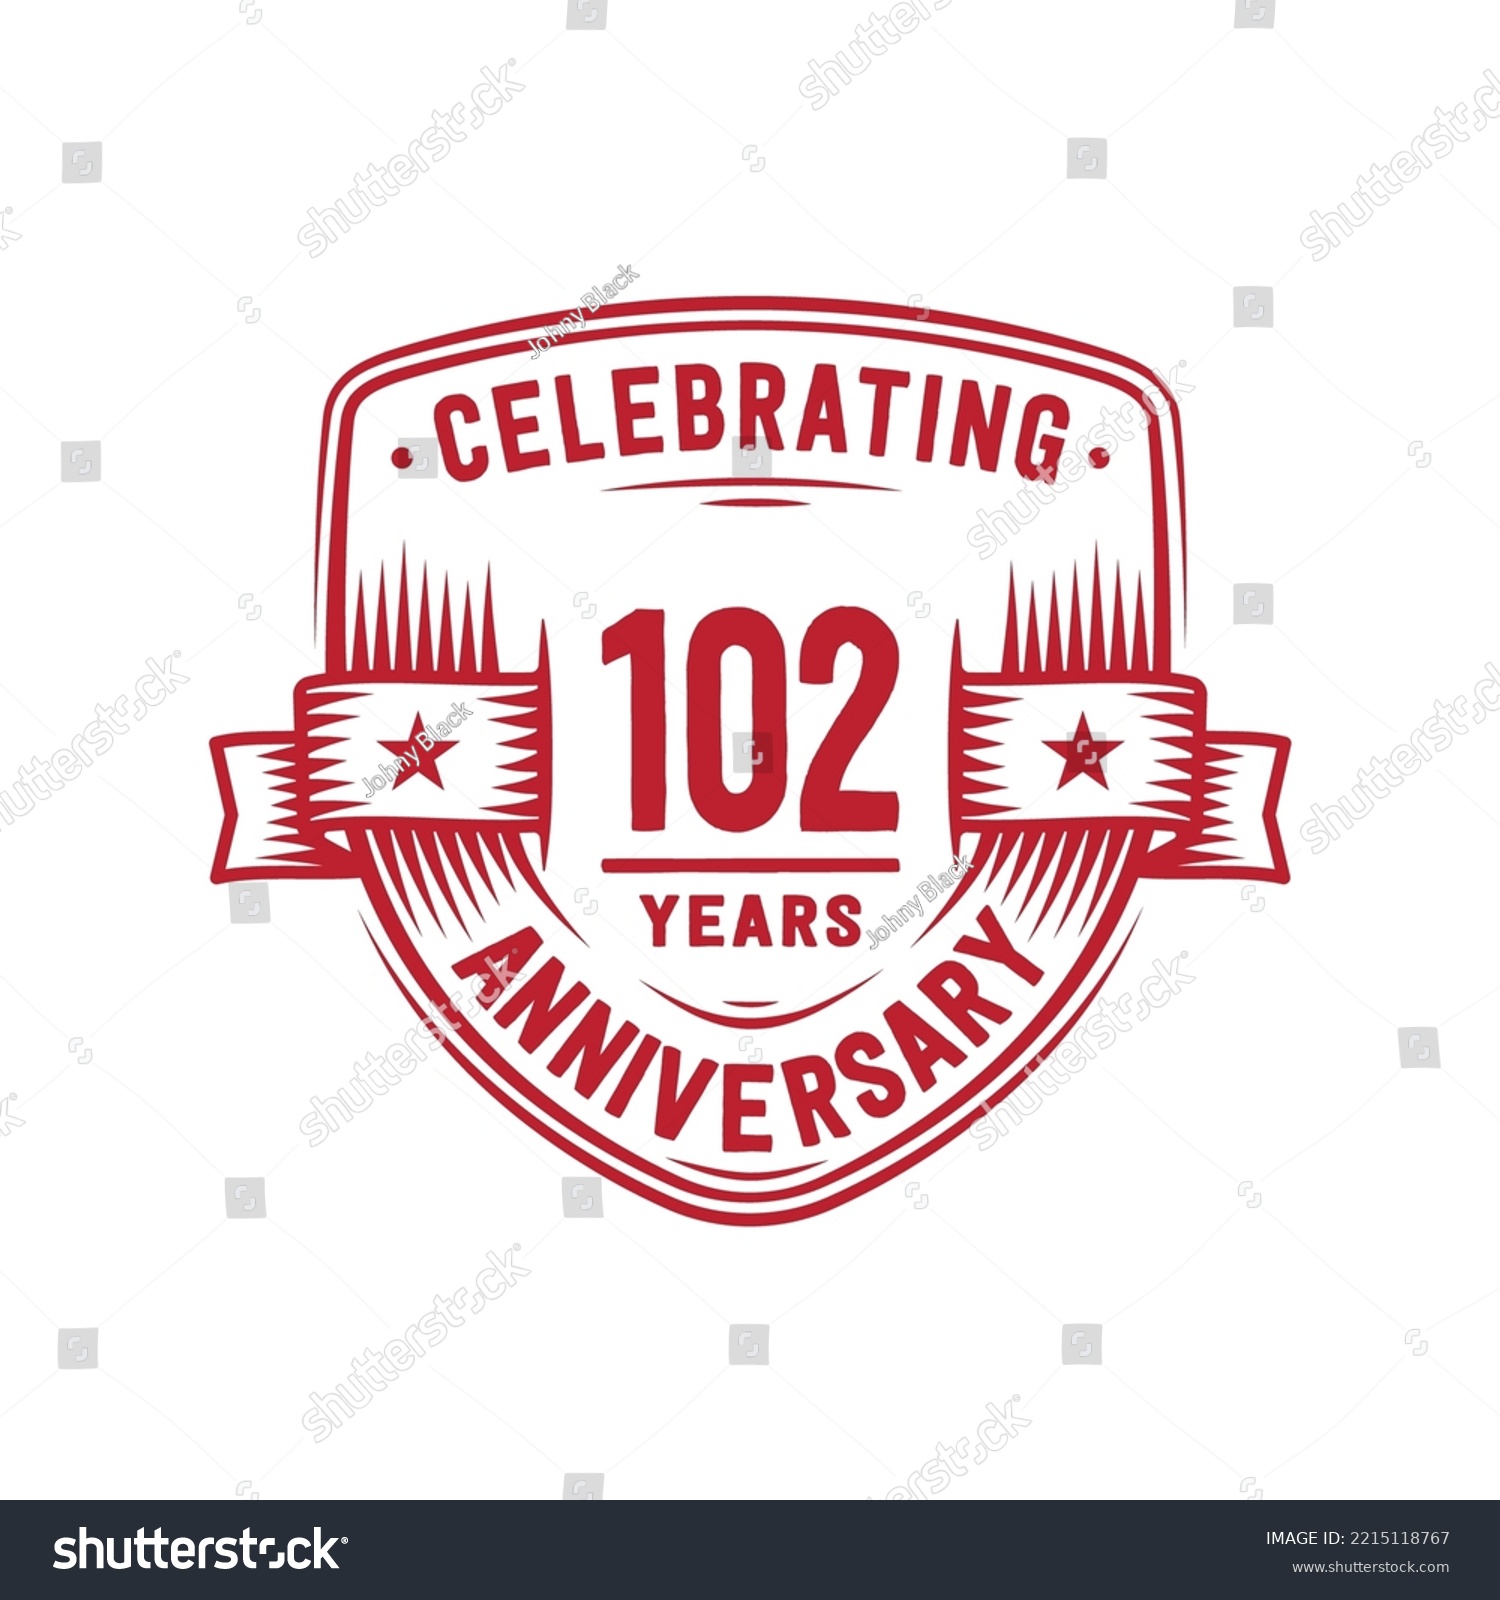 SVG of 102 years anniversary celebration shield design template. 102nd anniversary logo. Vector and illustration. svg